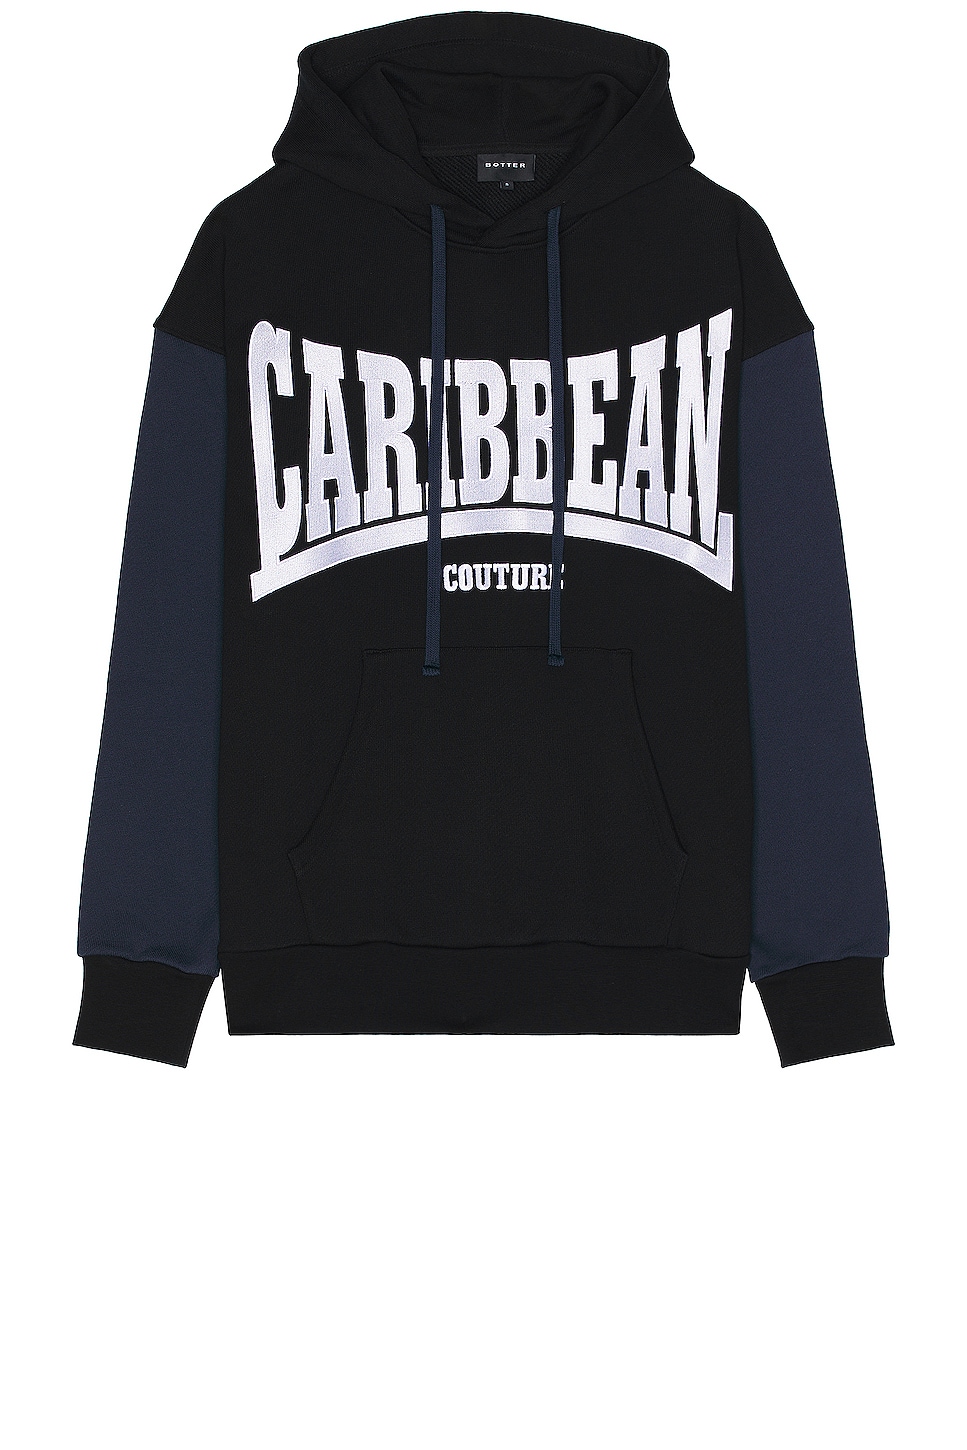 Image 1 of BOTTER Caribbean Couture Hoodie in Black